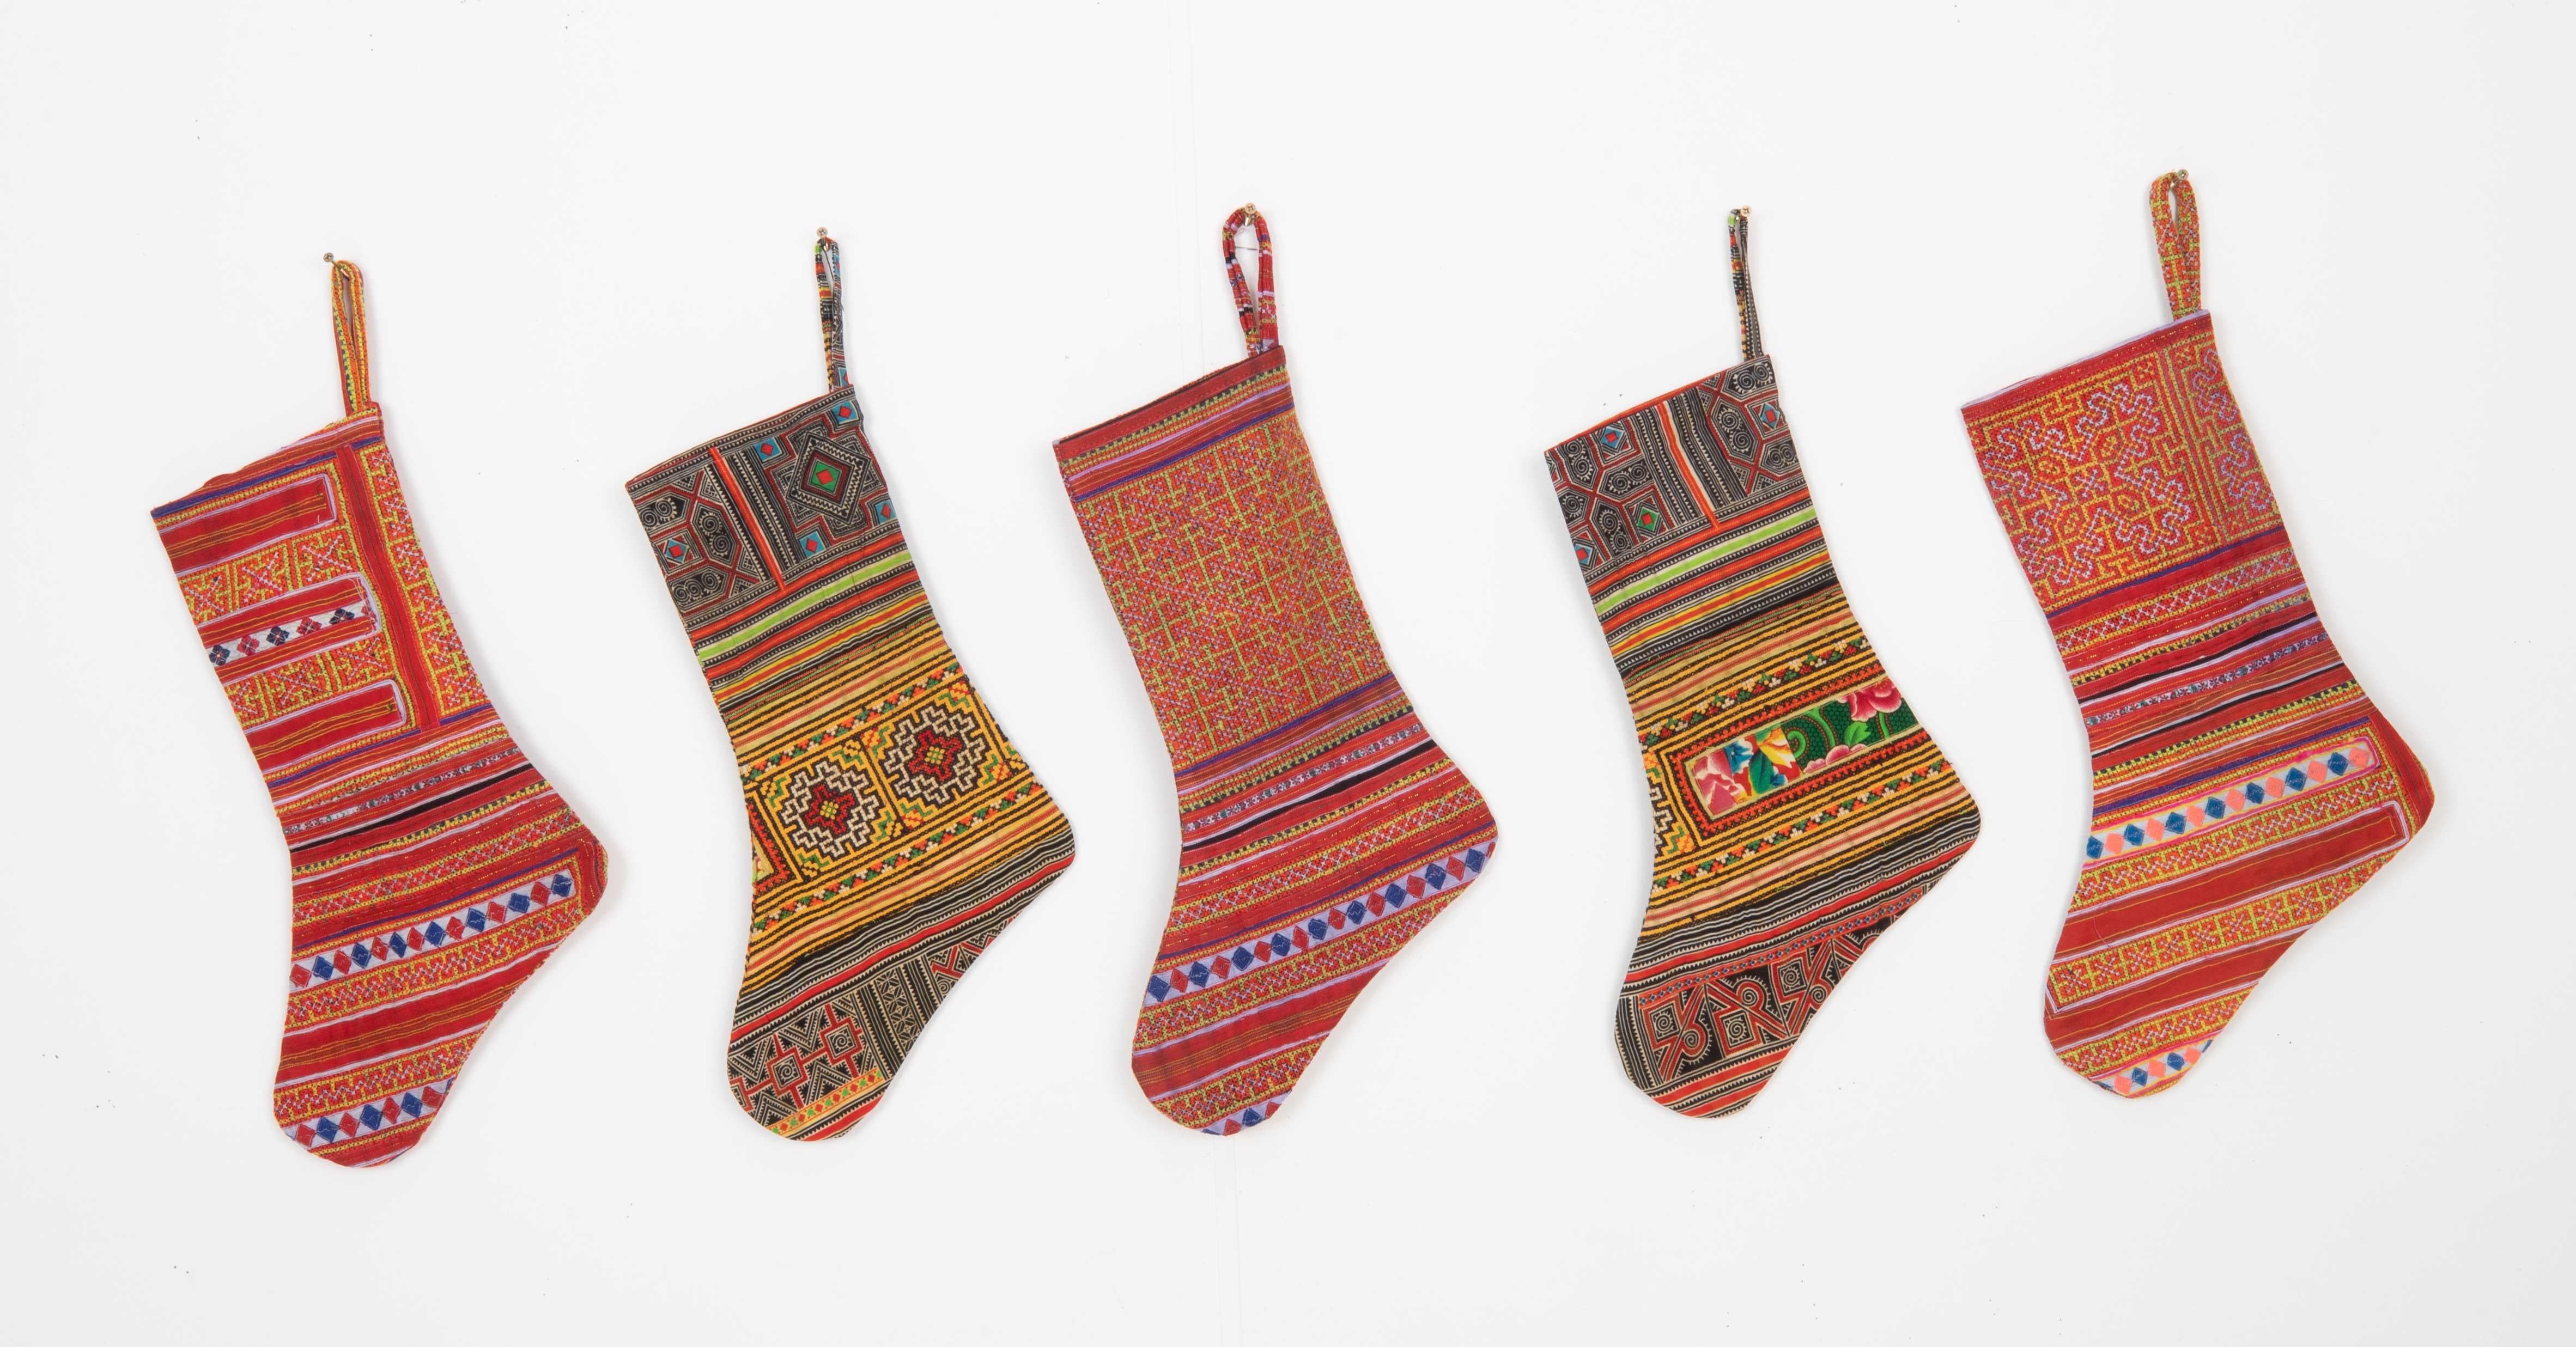 This Christmas Stocking was made from a late 19th or Early 20th C. Hmong textile fragments.
Linen in the back.

Please note, this stocking was made fromHmong textile fragments.
